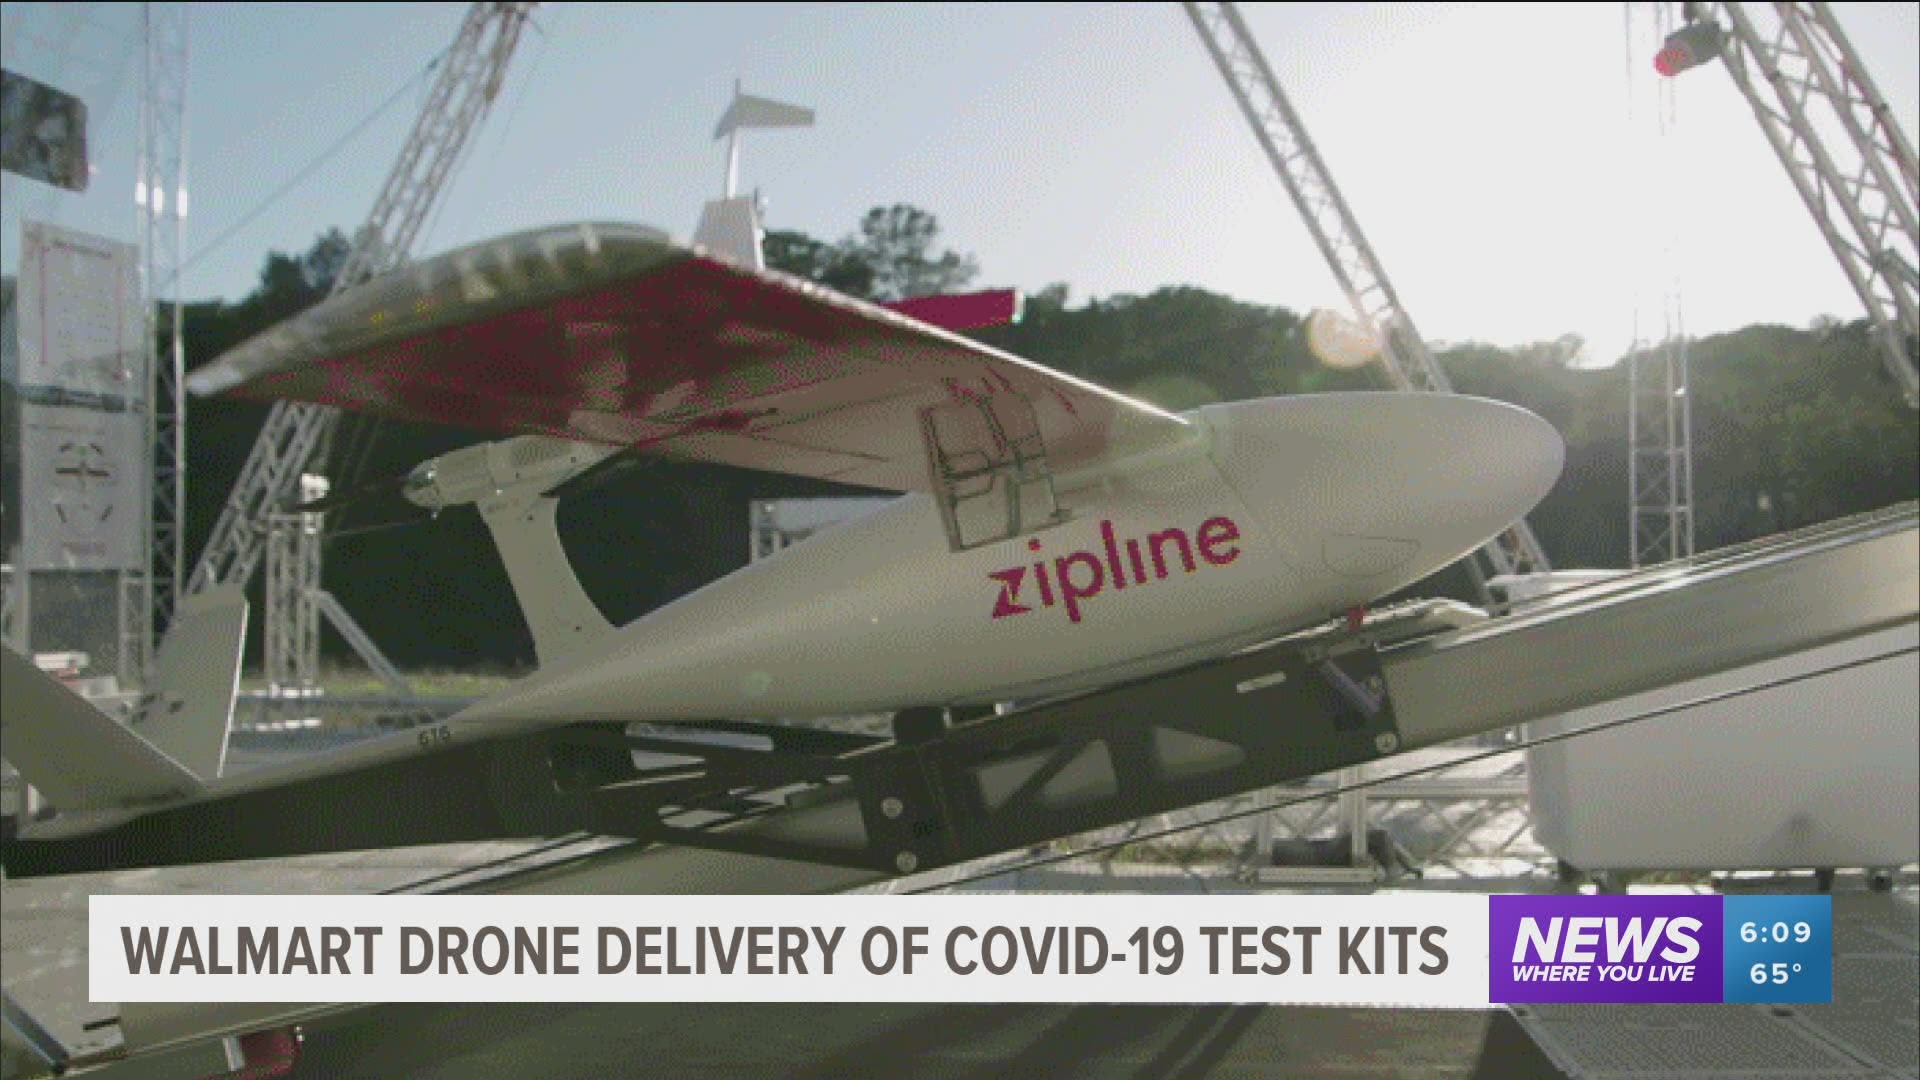 Walmart has launched a test program aimed at delivering COVID-19 test kits to customers' doorsteps using drones. https://bit.ly/3cmYp1U